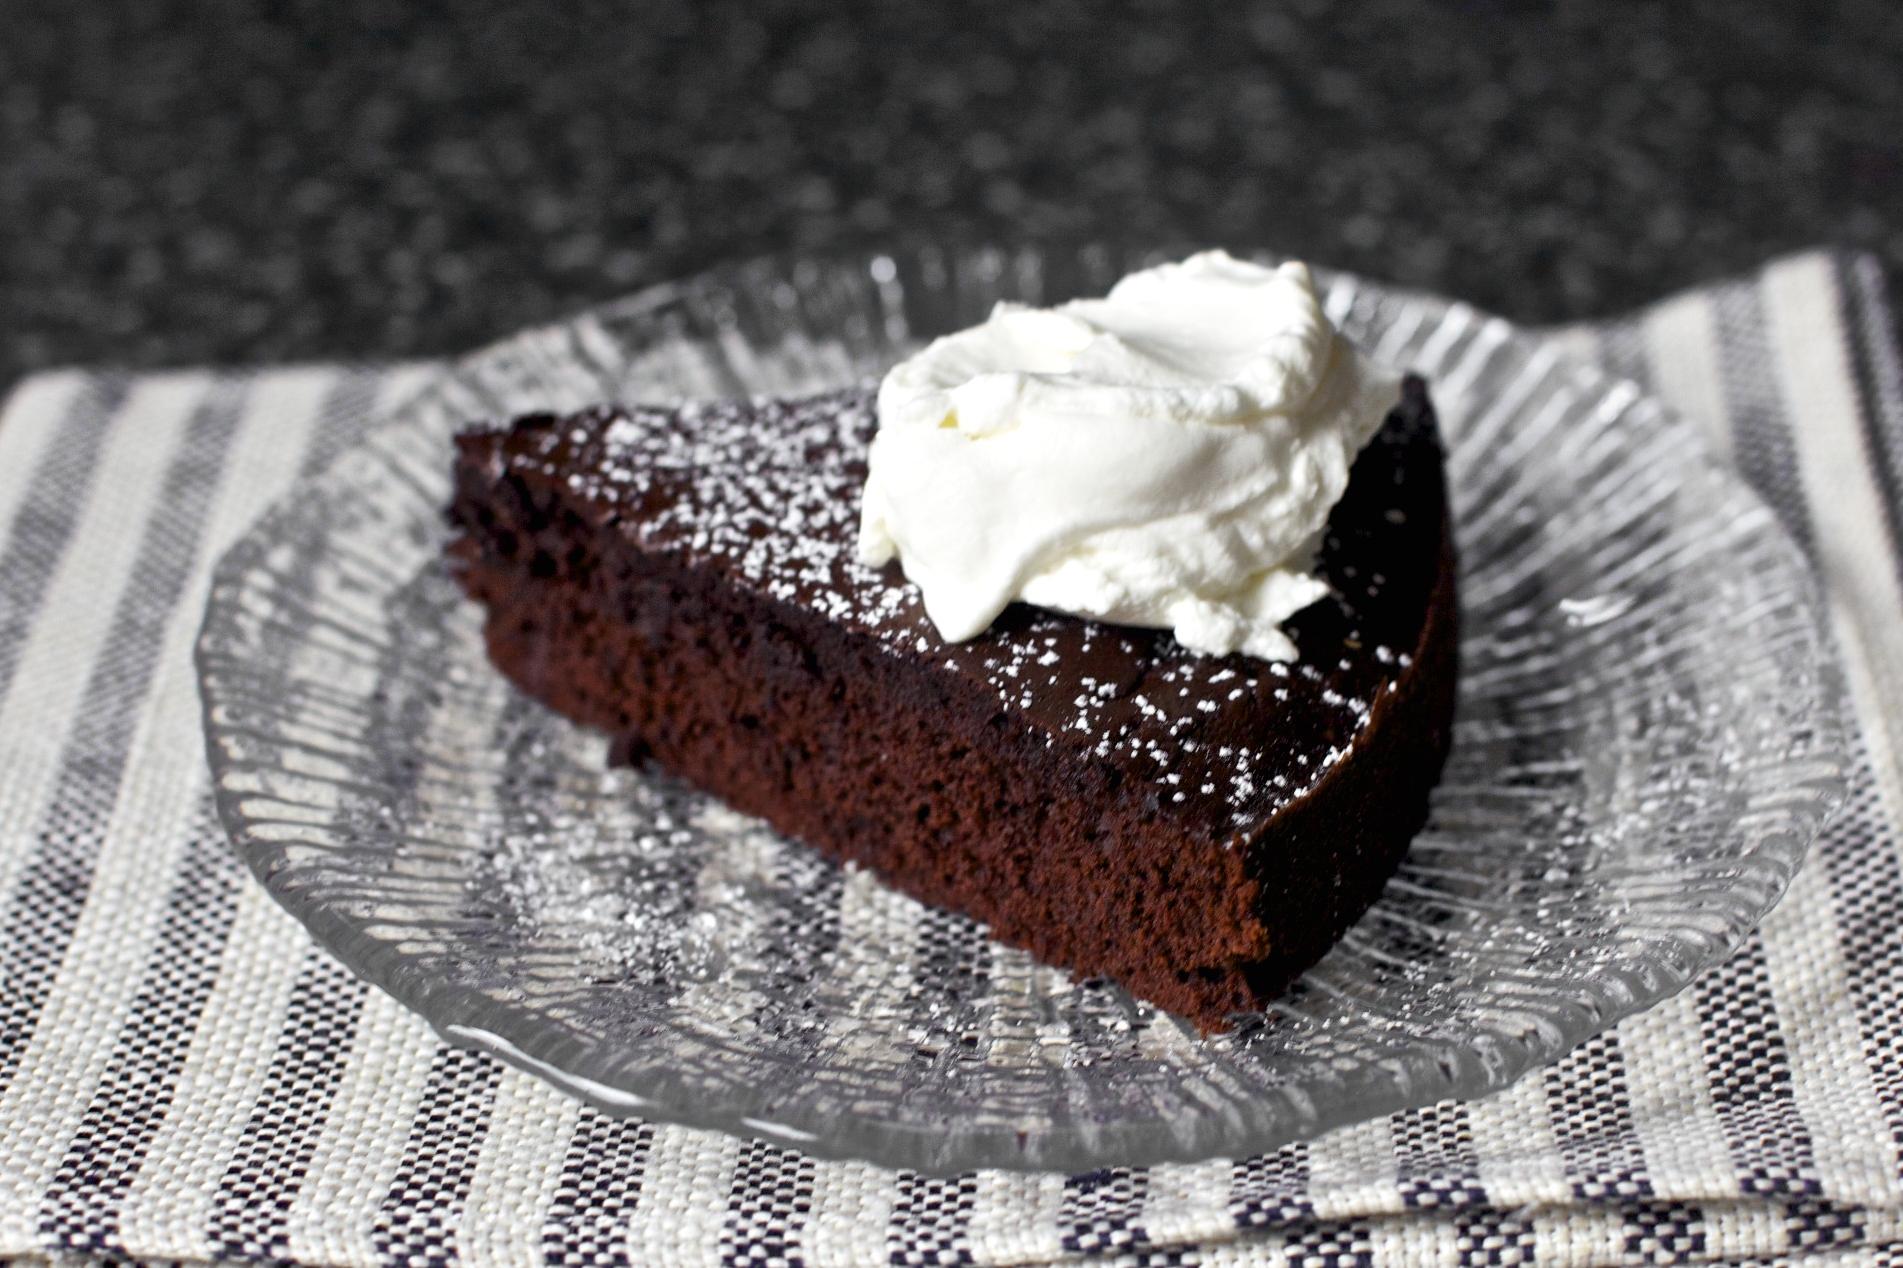  The bold flavor of red wine adds depth and complexity to the rich chocolate cake.